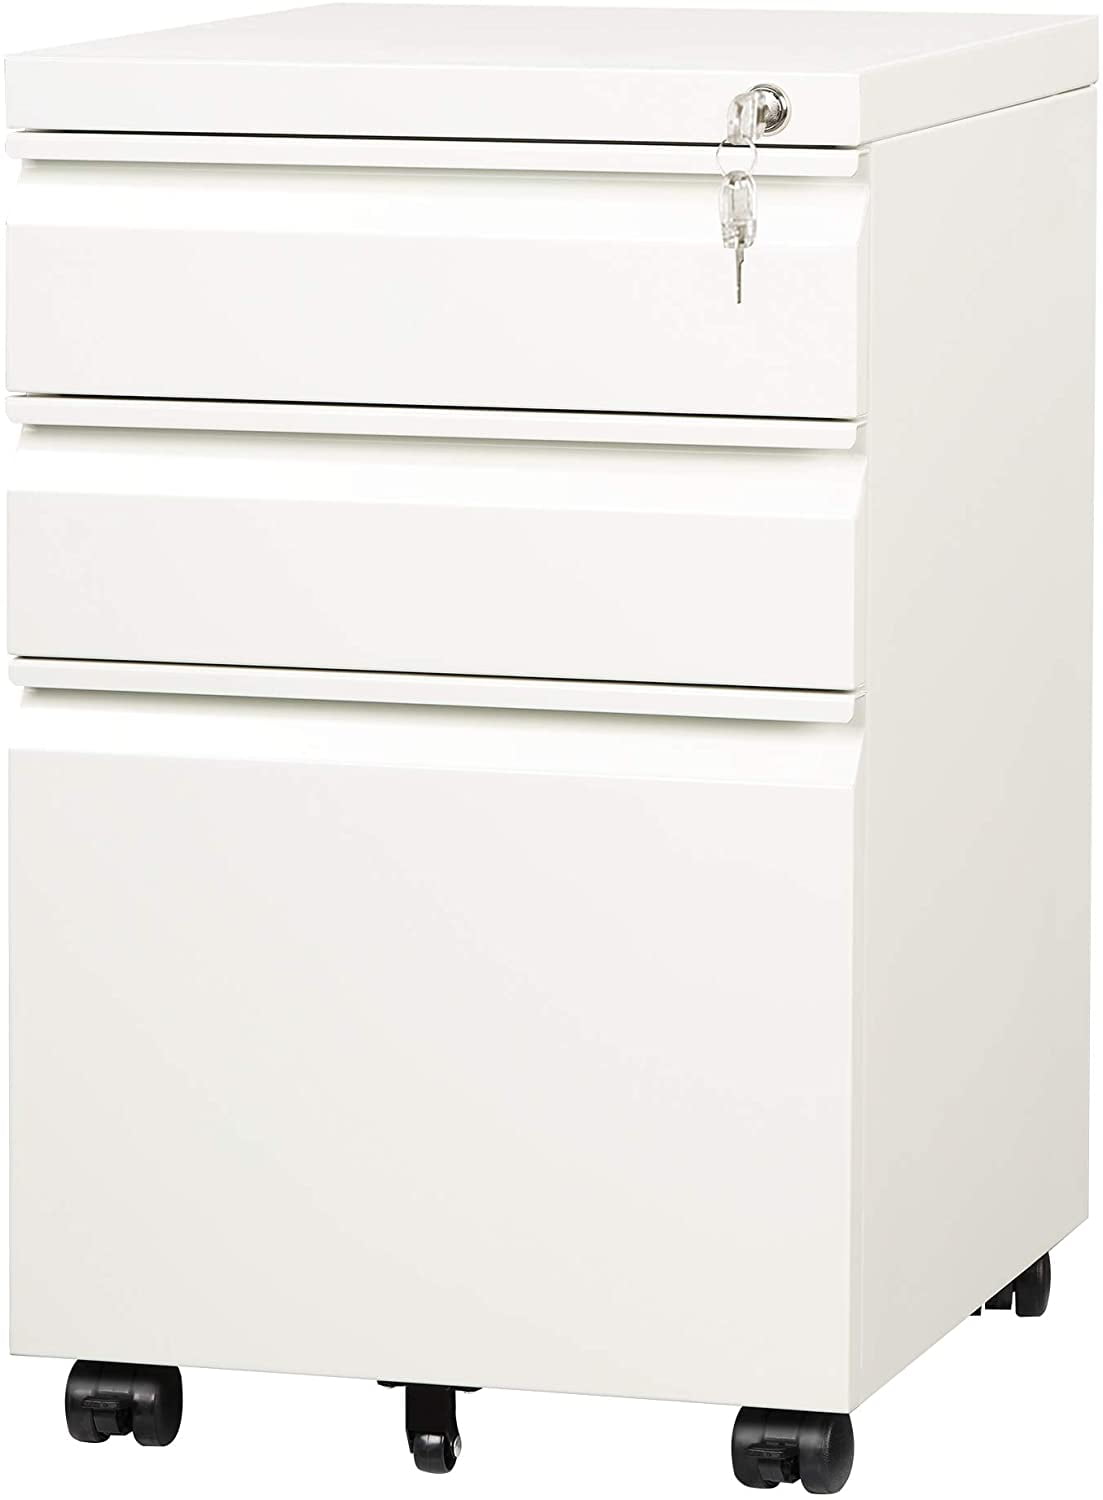 File Folders DEVAISE 3 Drawer Metal File Cabinet with Lock 